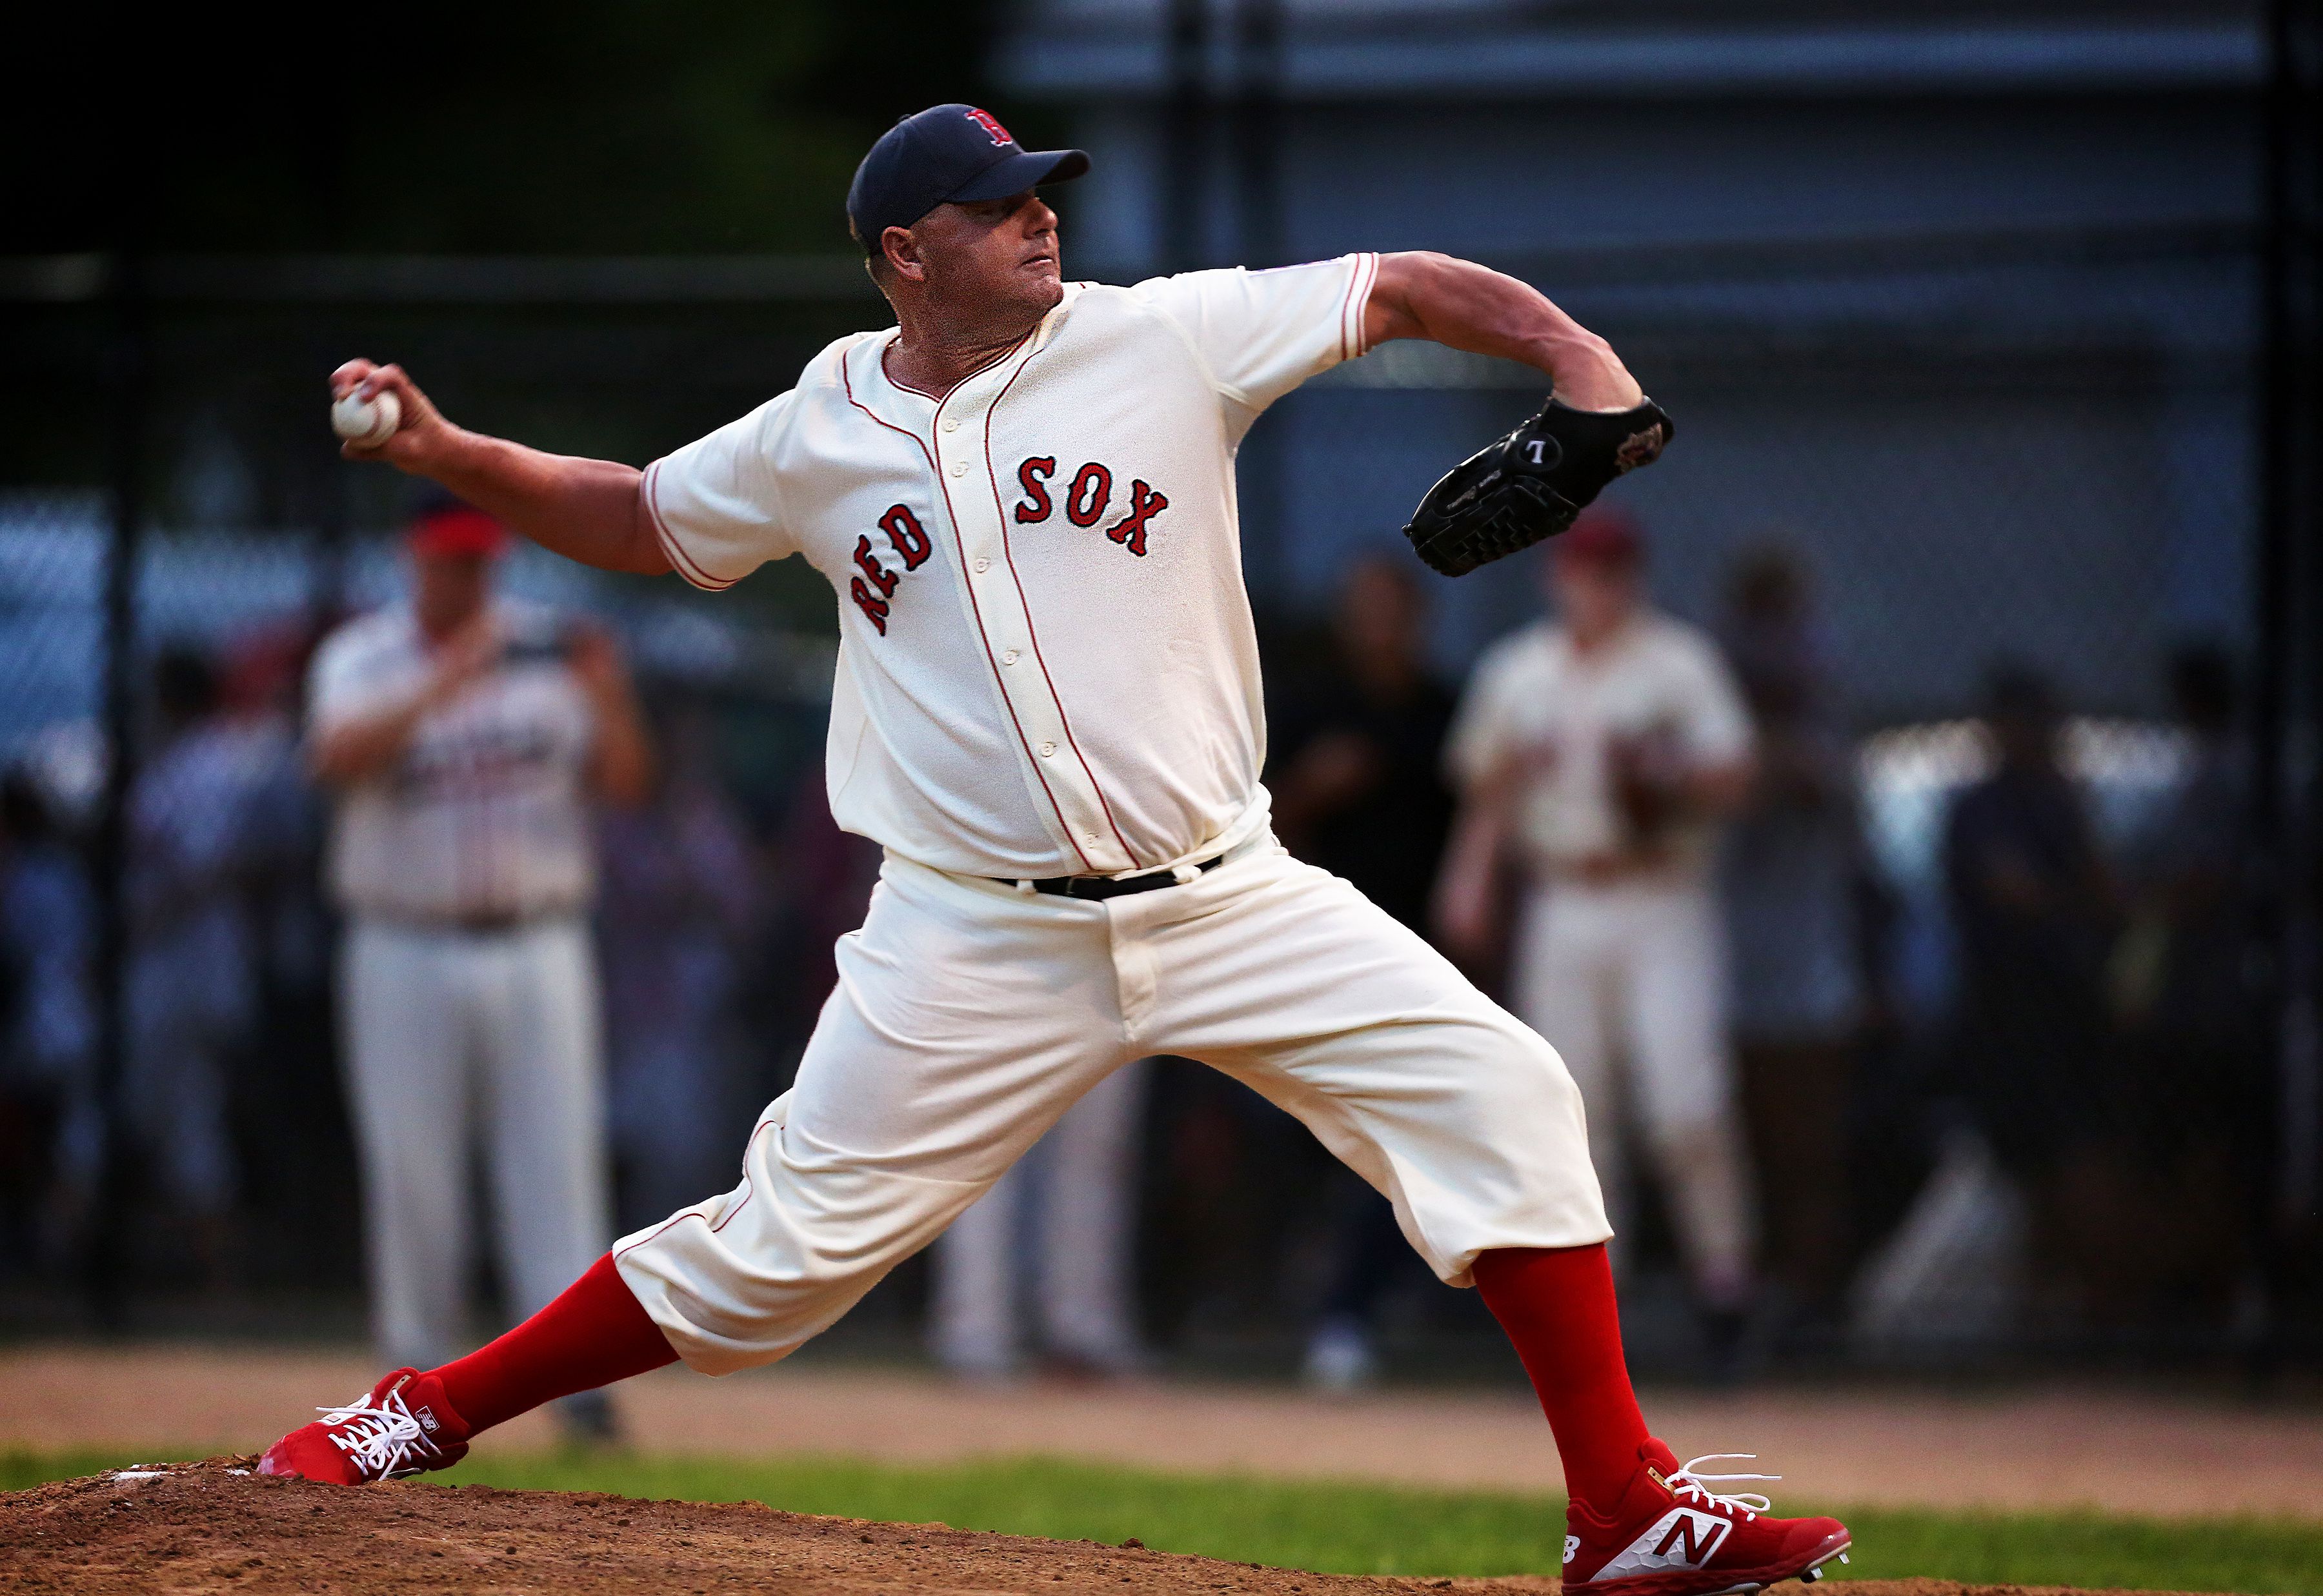 Catching up with Roger Clemens - The Boston Globe